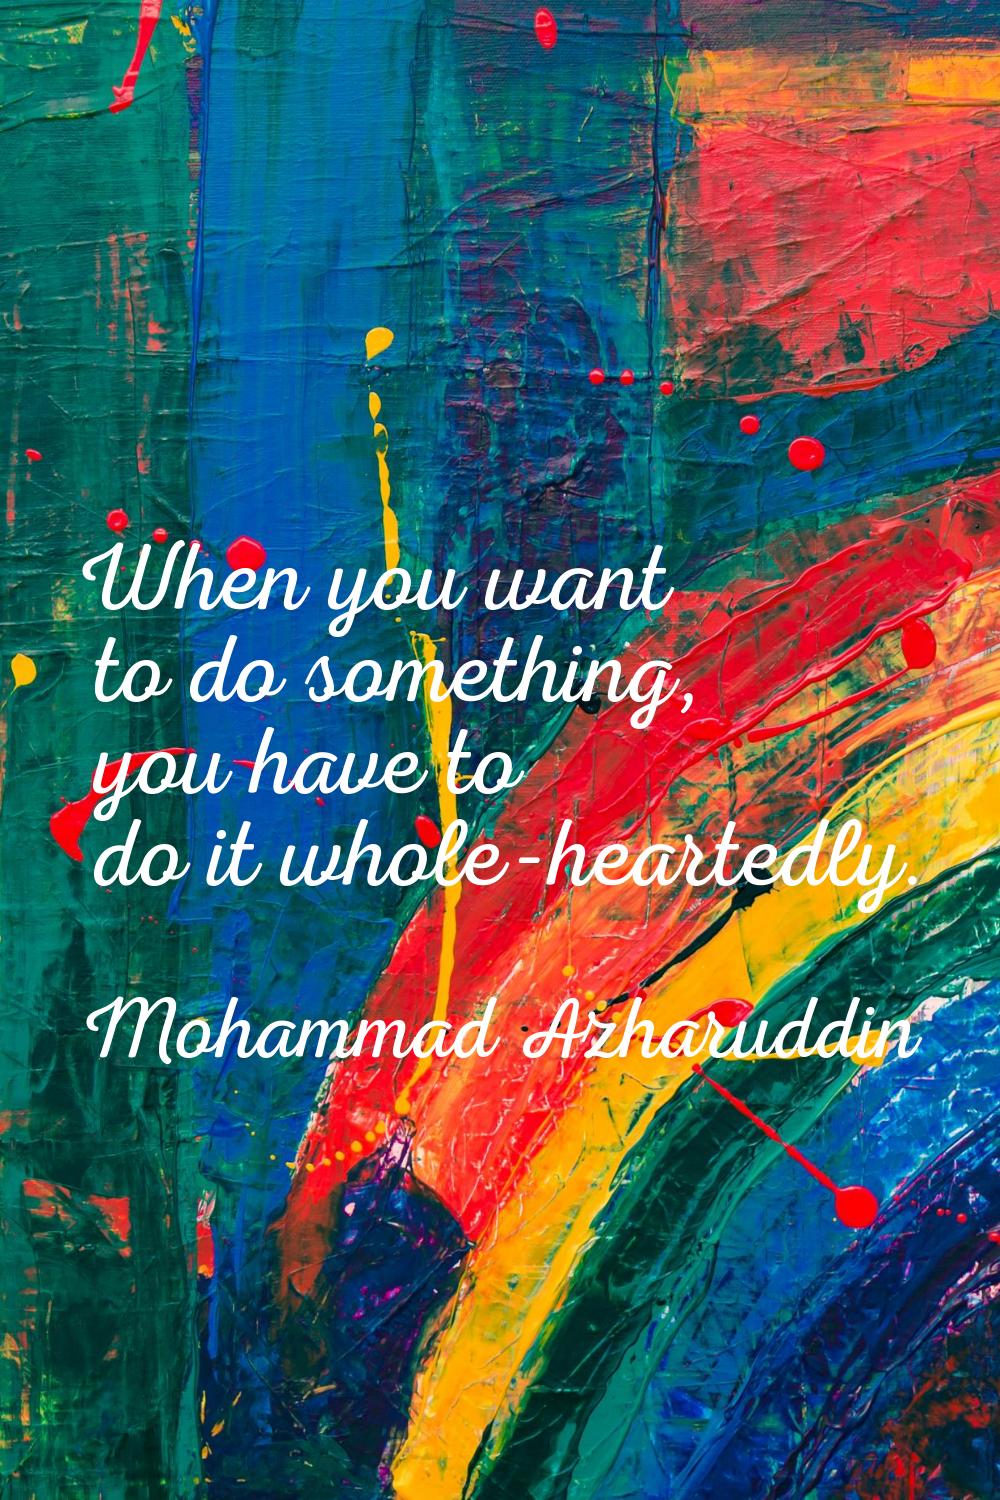 When you want to do something, you have to do it whole-heartedly.